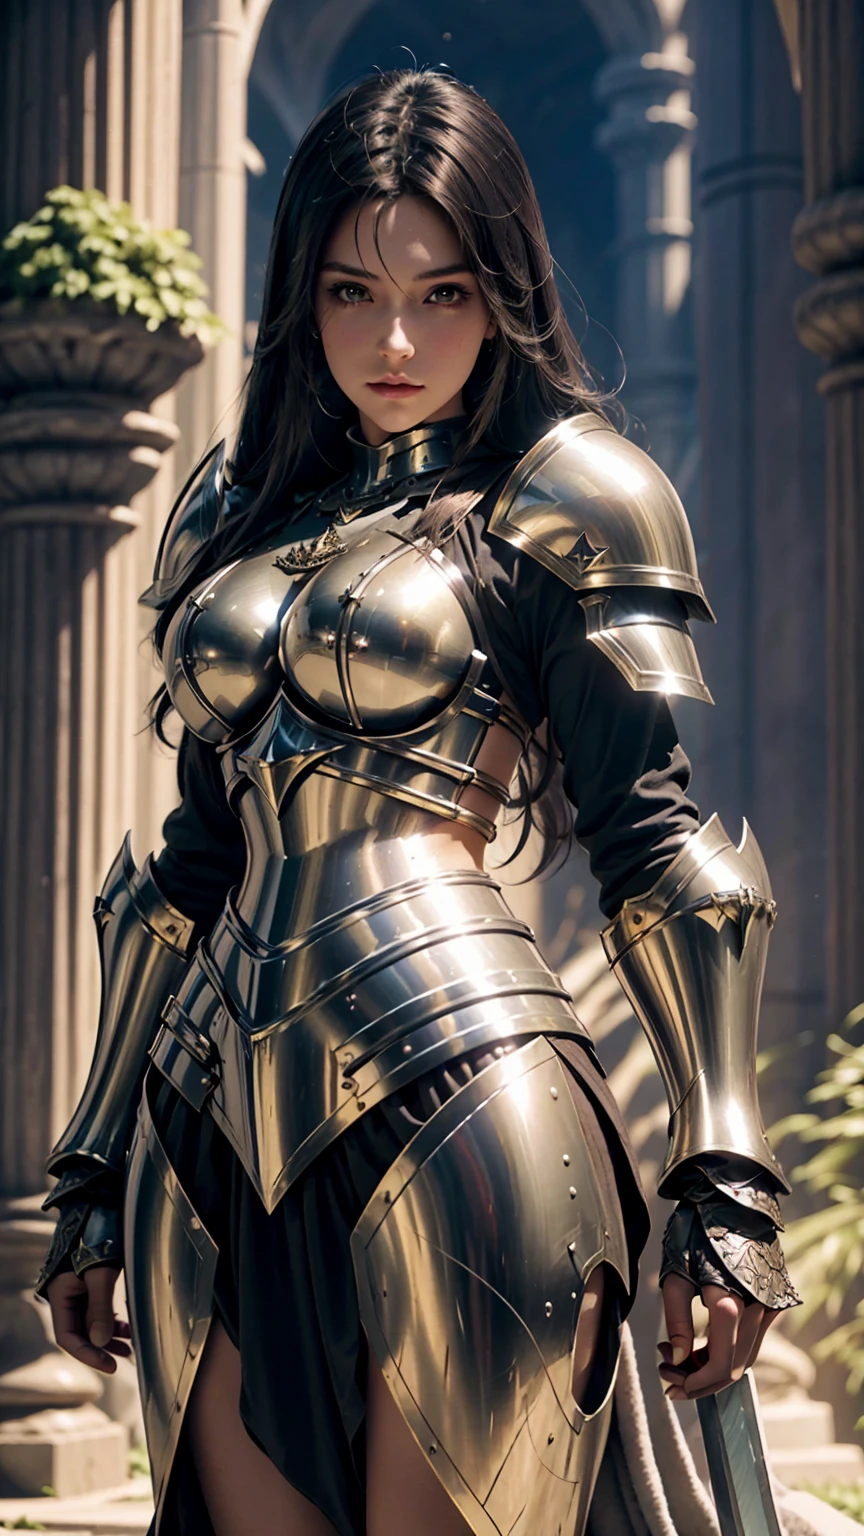 a close up of a woman in armor holding a sword, armor girl, 2. 5 d cgi anime fantasy artwork, detailed fantasy art, fantasy paladin woman, epic fantasy art style hd, girl in knight armor, beautiful female knight, of a beautiful female knight, 4k fantasy art, extremely detailed artgerm, gorgeous female paladin, bikini armor female knight
